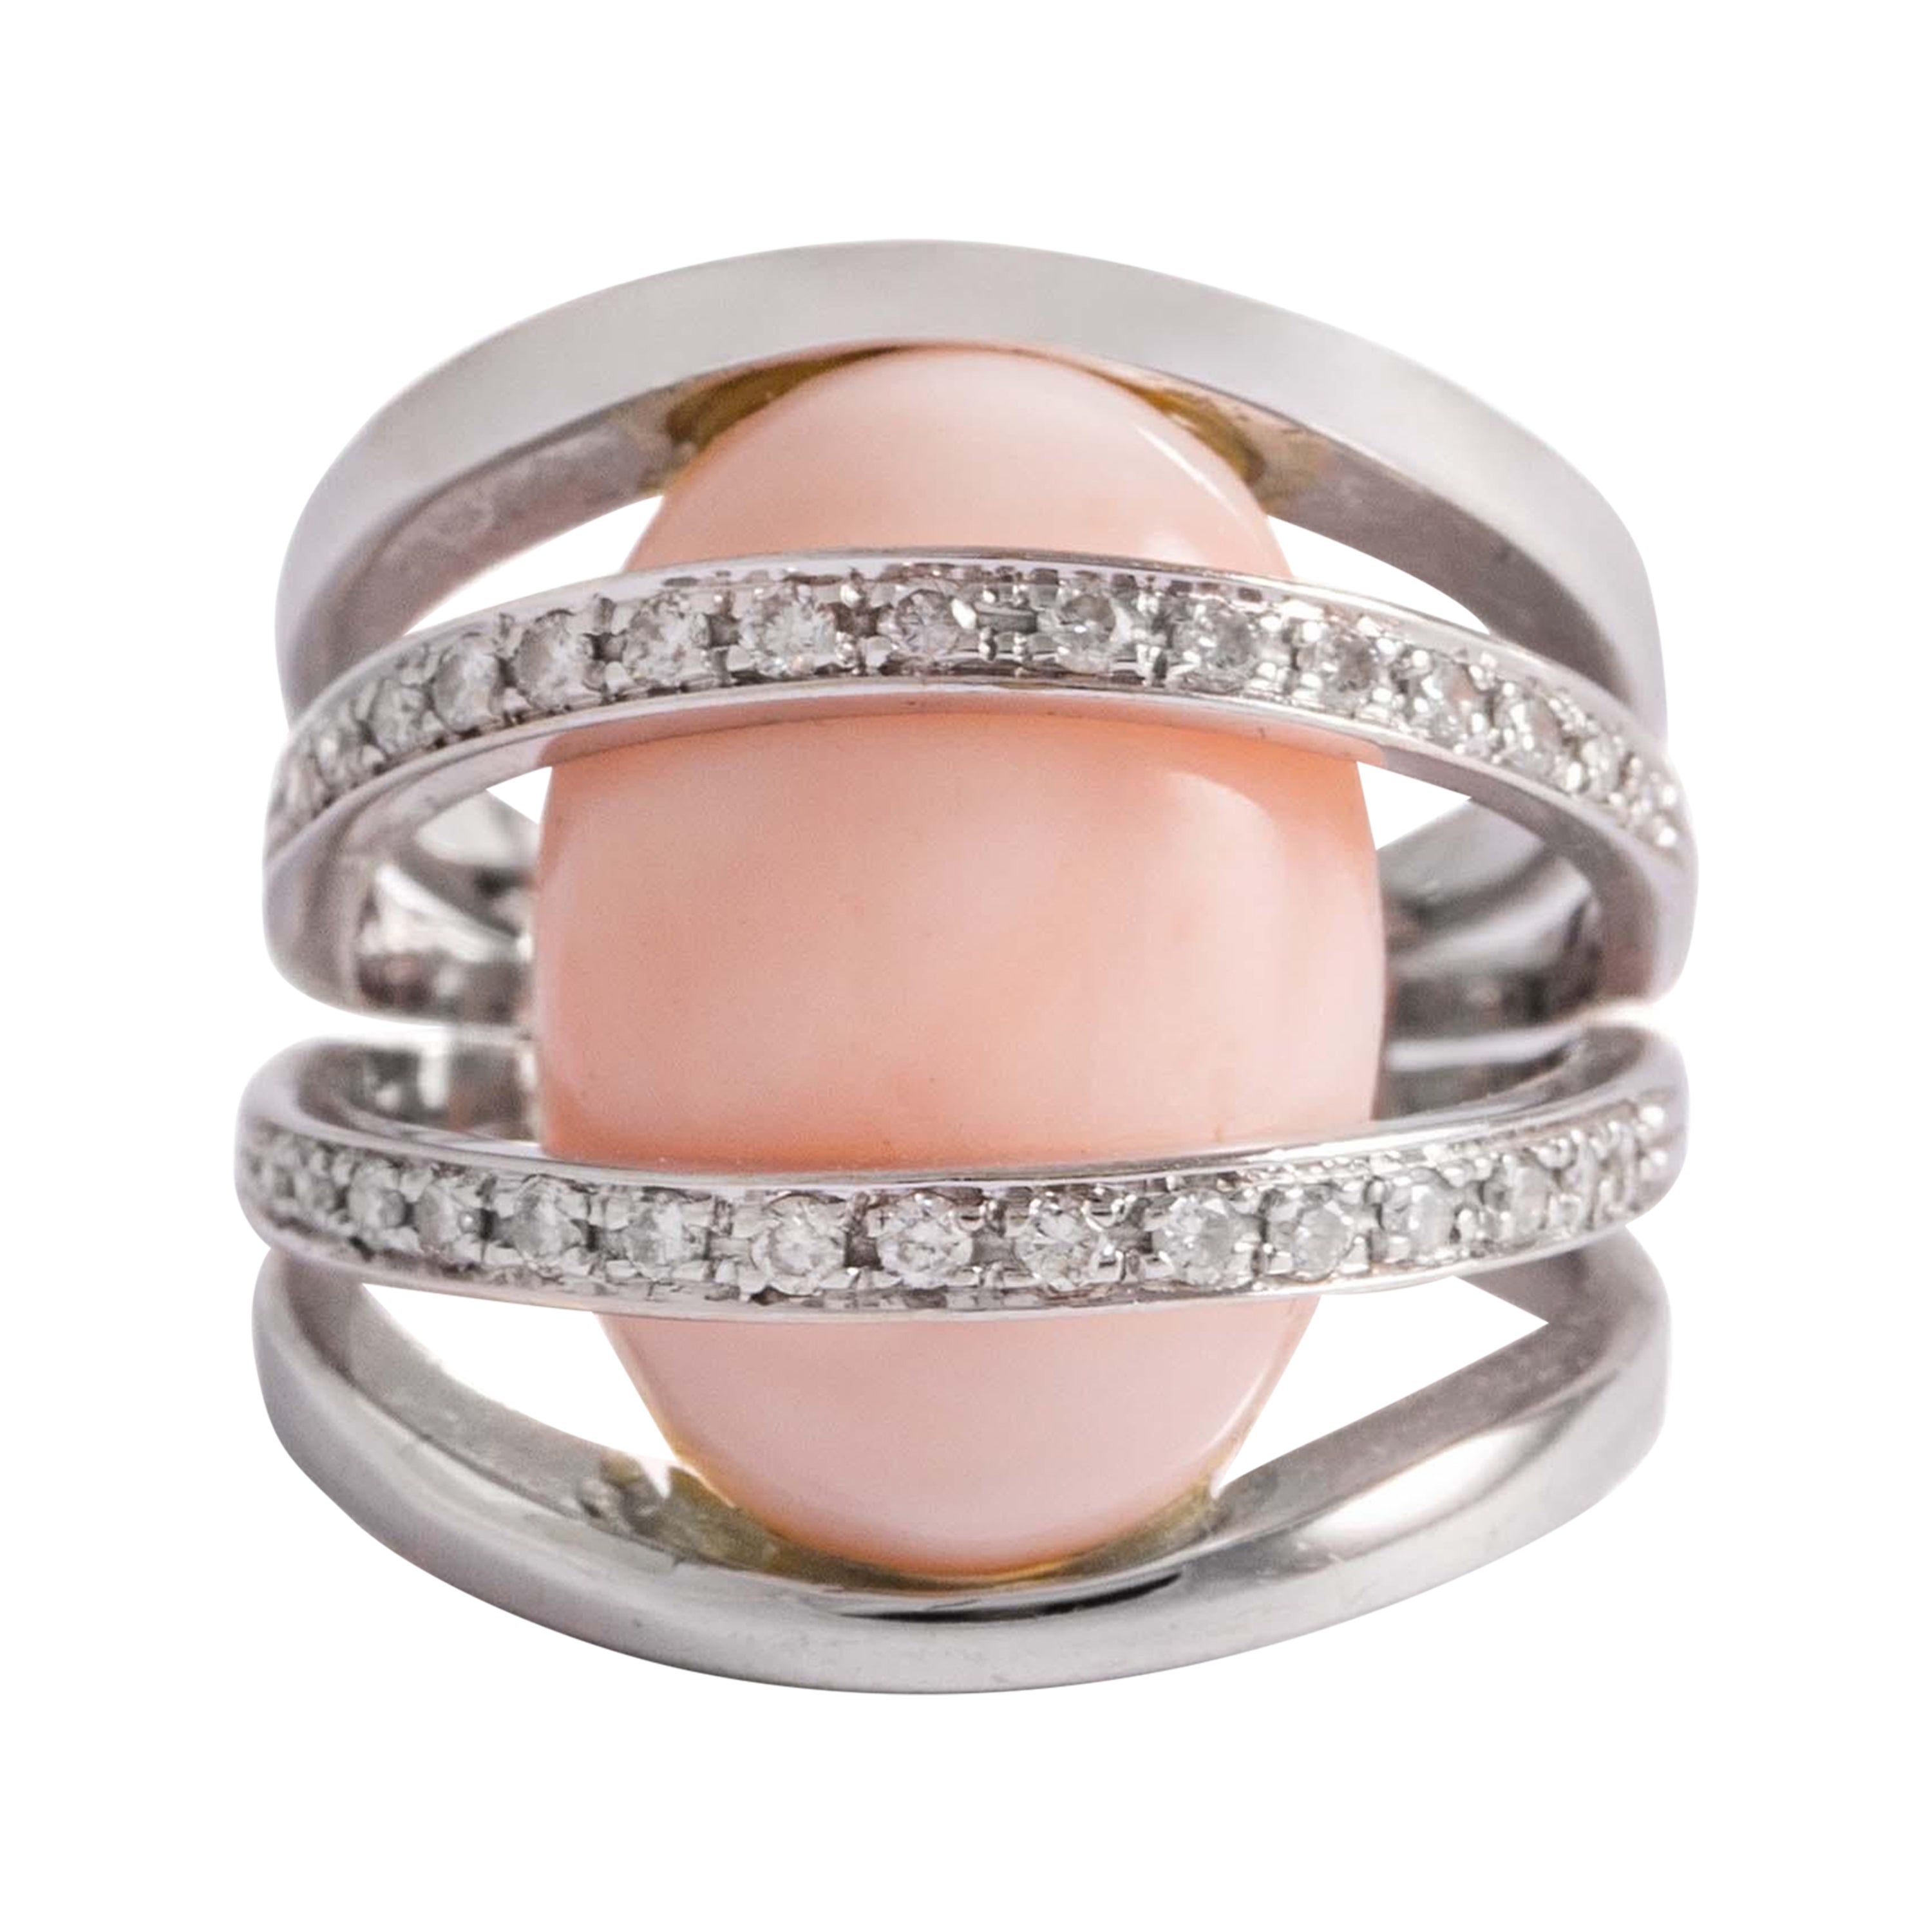 White Gold Ring Set with Round-Cut Diamonds and Holding a Pink Hardstone